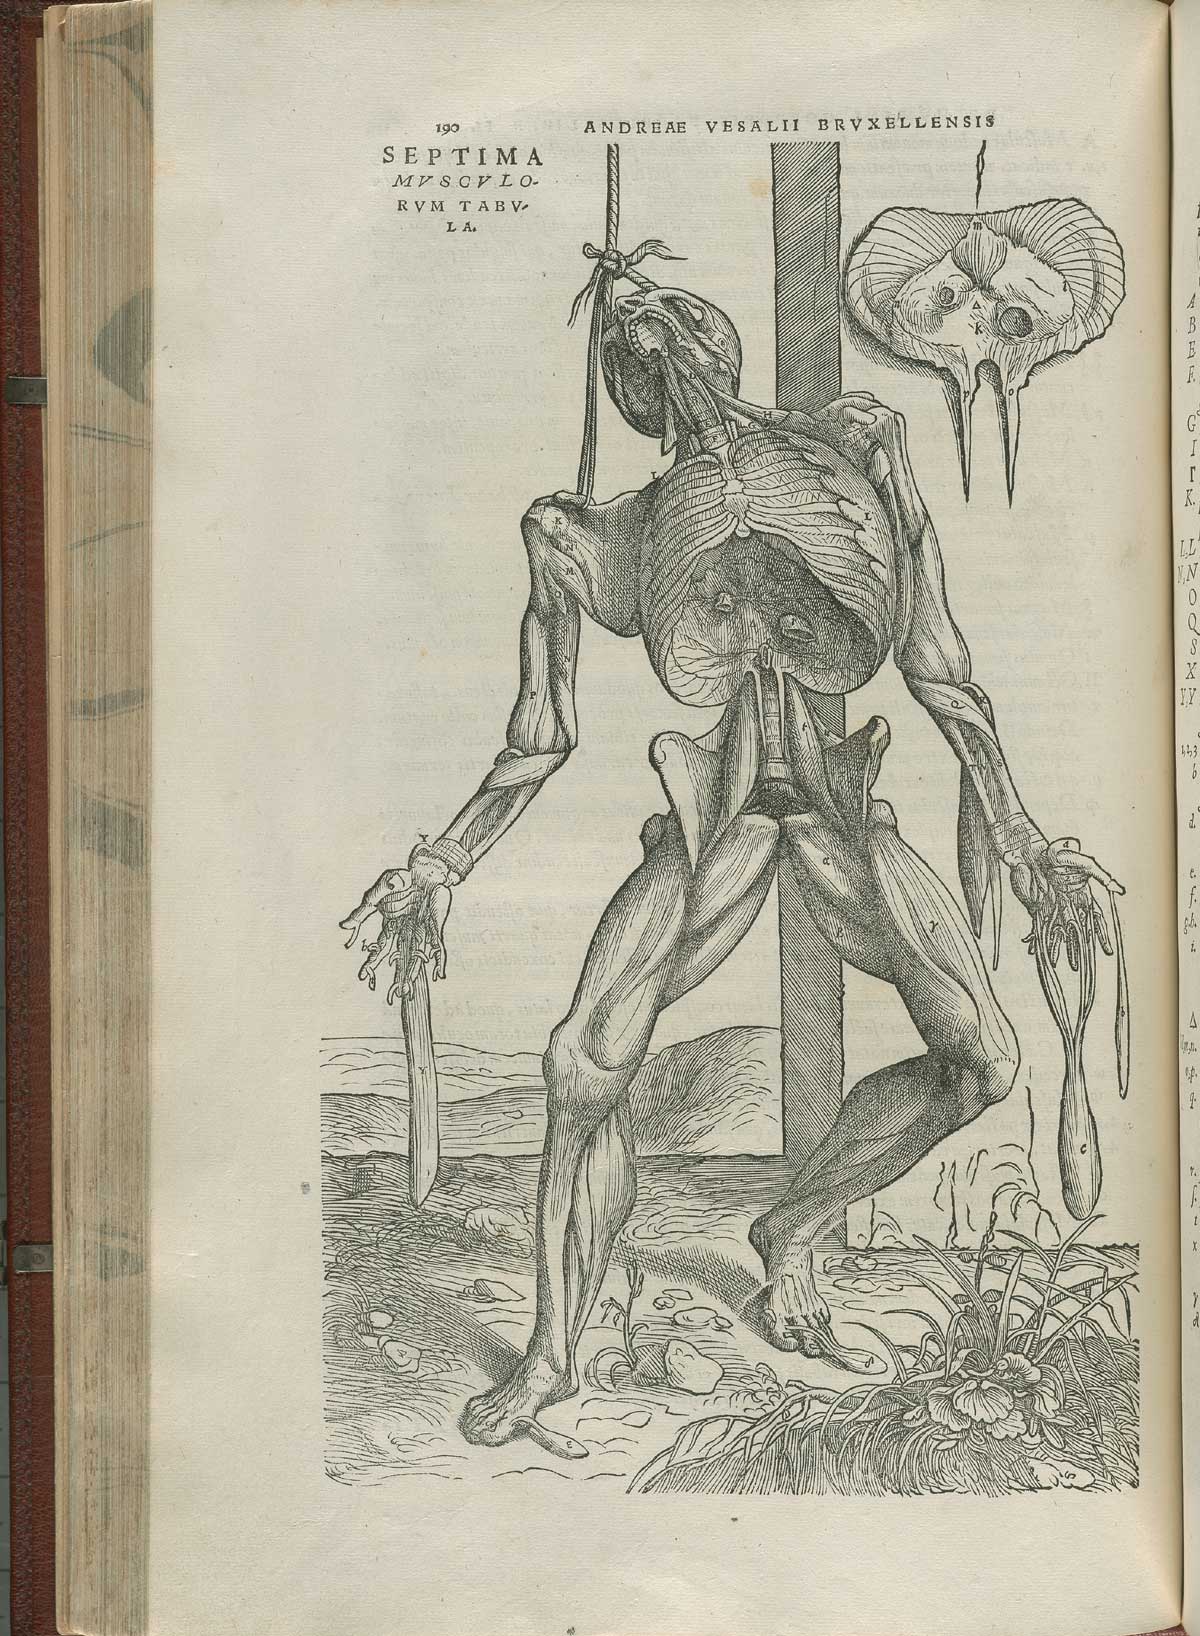 Page 190 of Andreas Vesalius' De corporis humani fabrica libri septem, featuring the illustrated woodcut of the seventh muscle plate, a full-length flayed corpse hanging from a rope tied through its skull. His skin is flayed, exposing insides and the interior of the chest cavity.